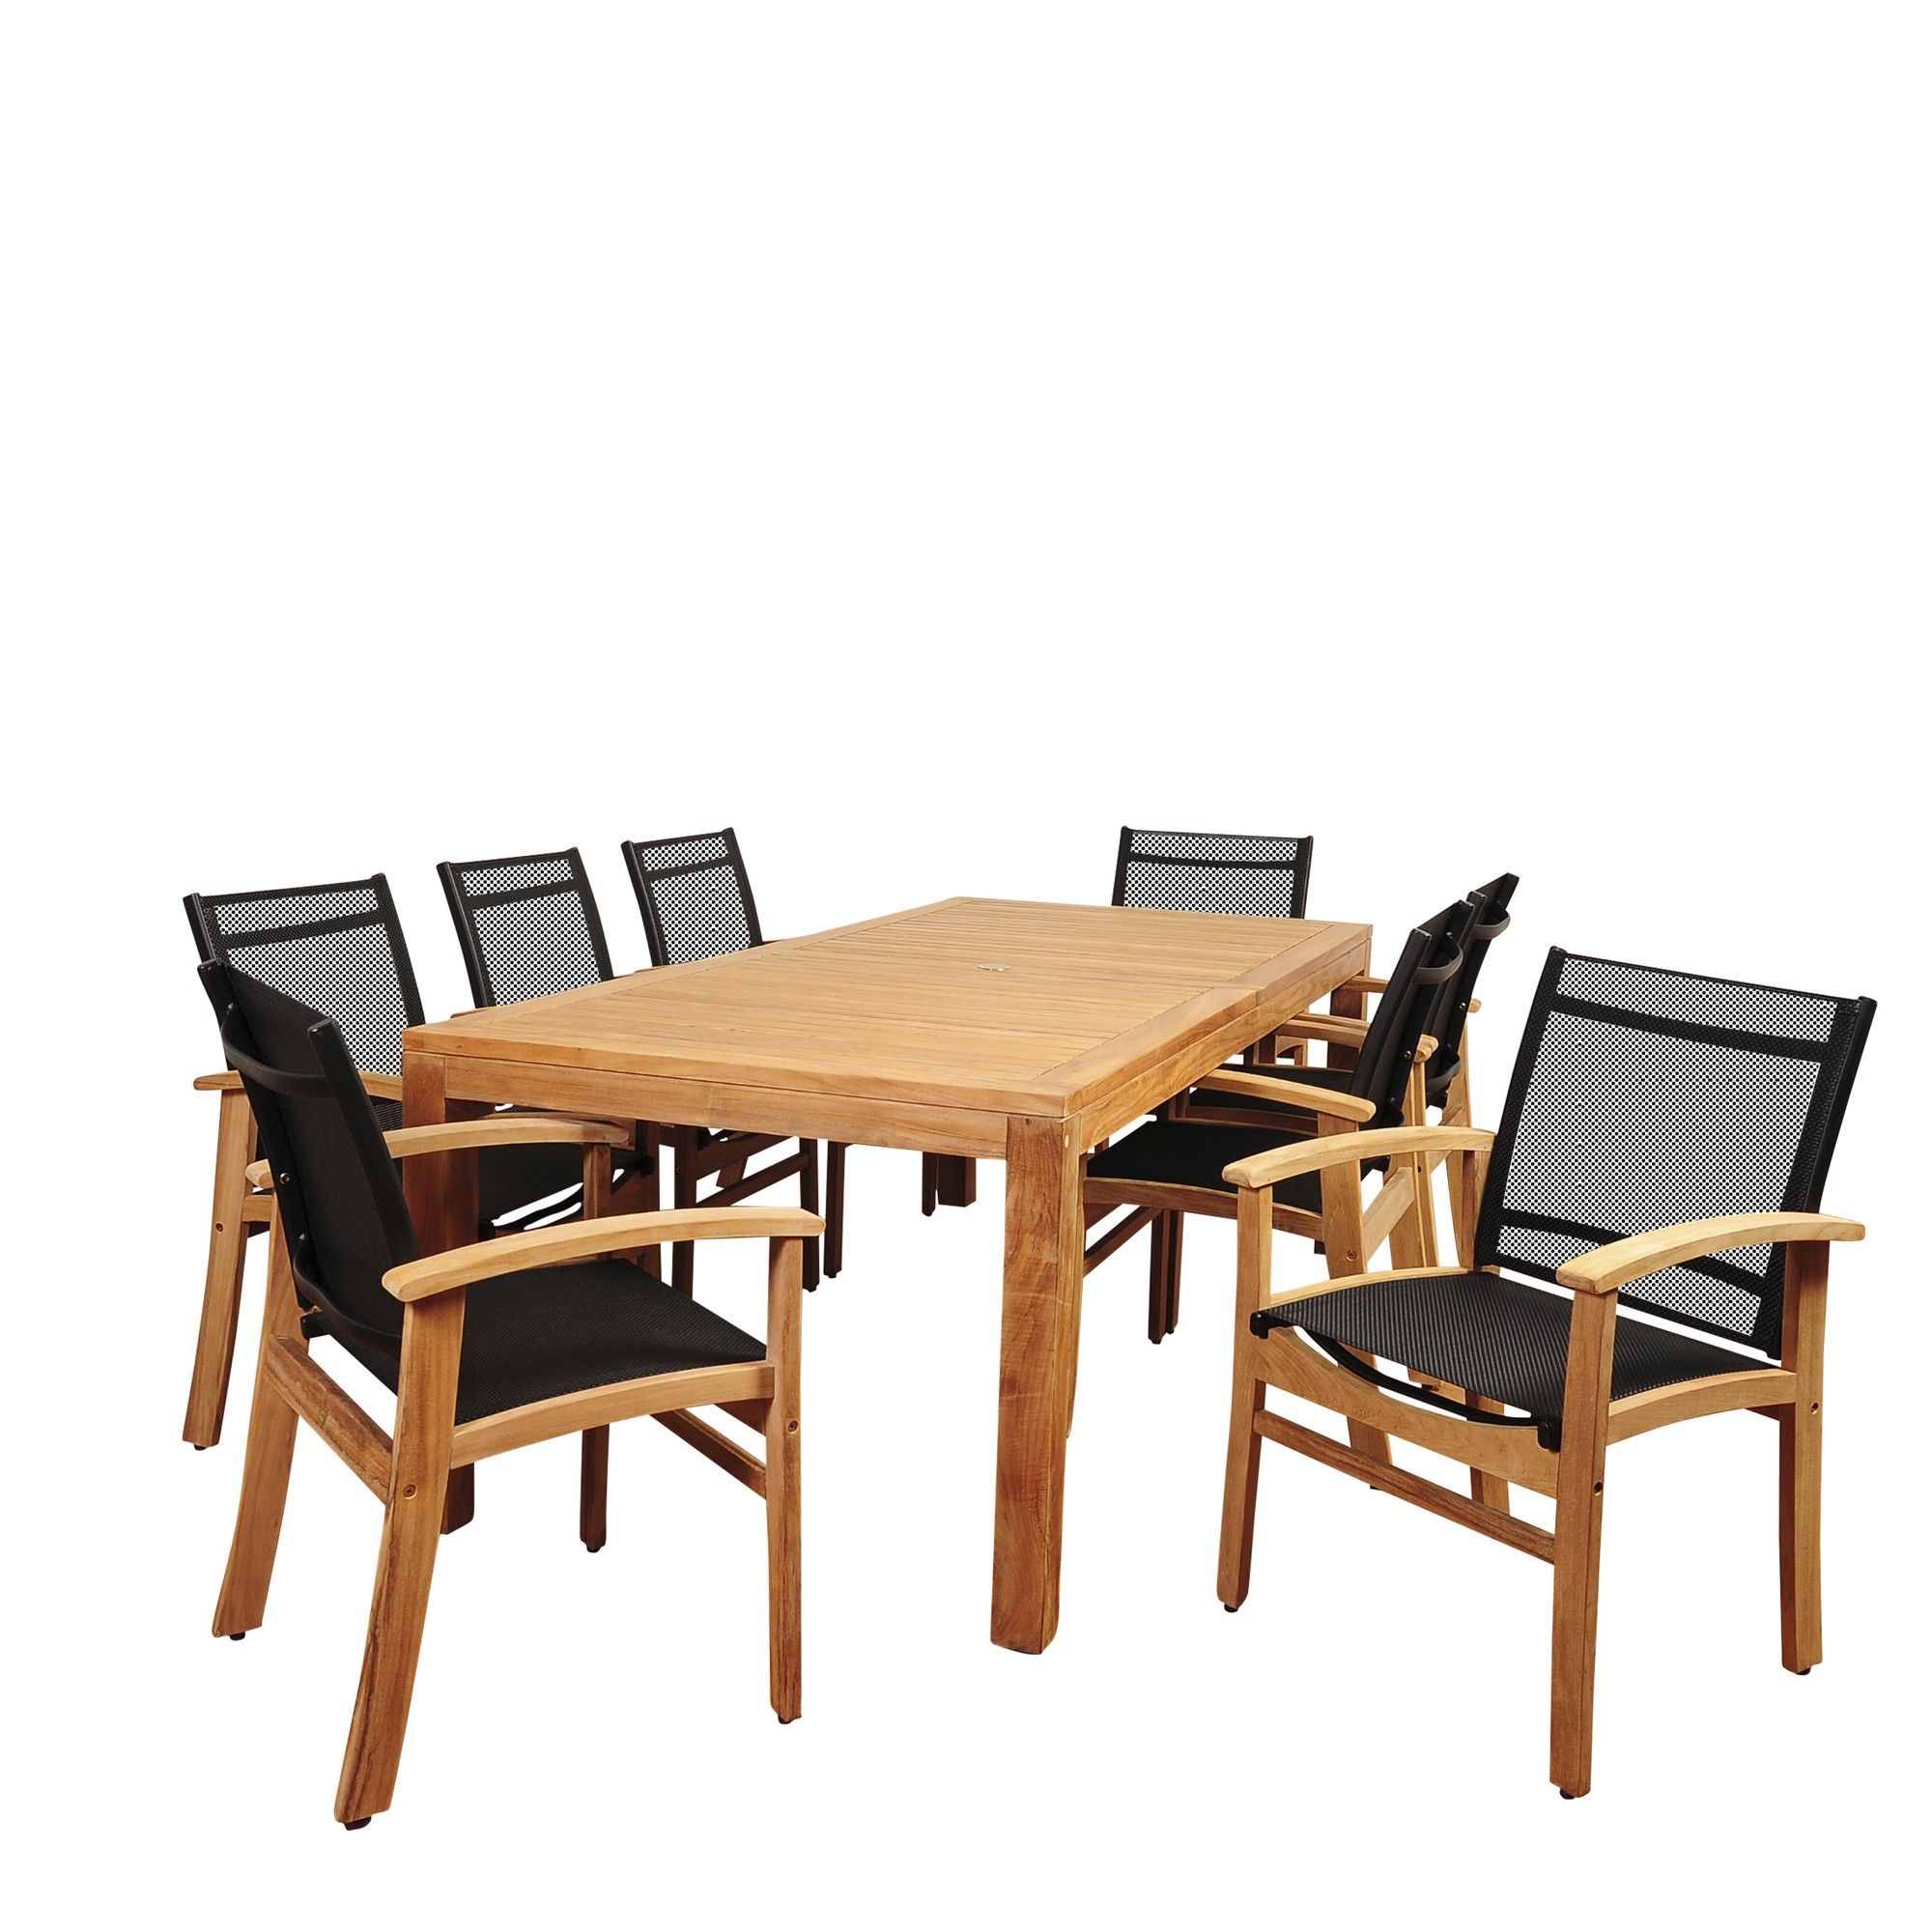 9 Piece Brown And Black Terrace Teak Rectangular Outdoor Patio Dining Pertaining To 9 Piece Teak Outdoor Square Dining Sets (View 13 of 15)